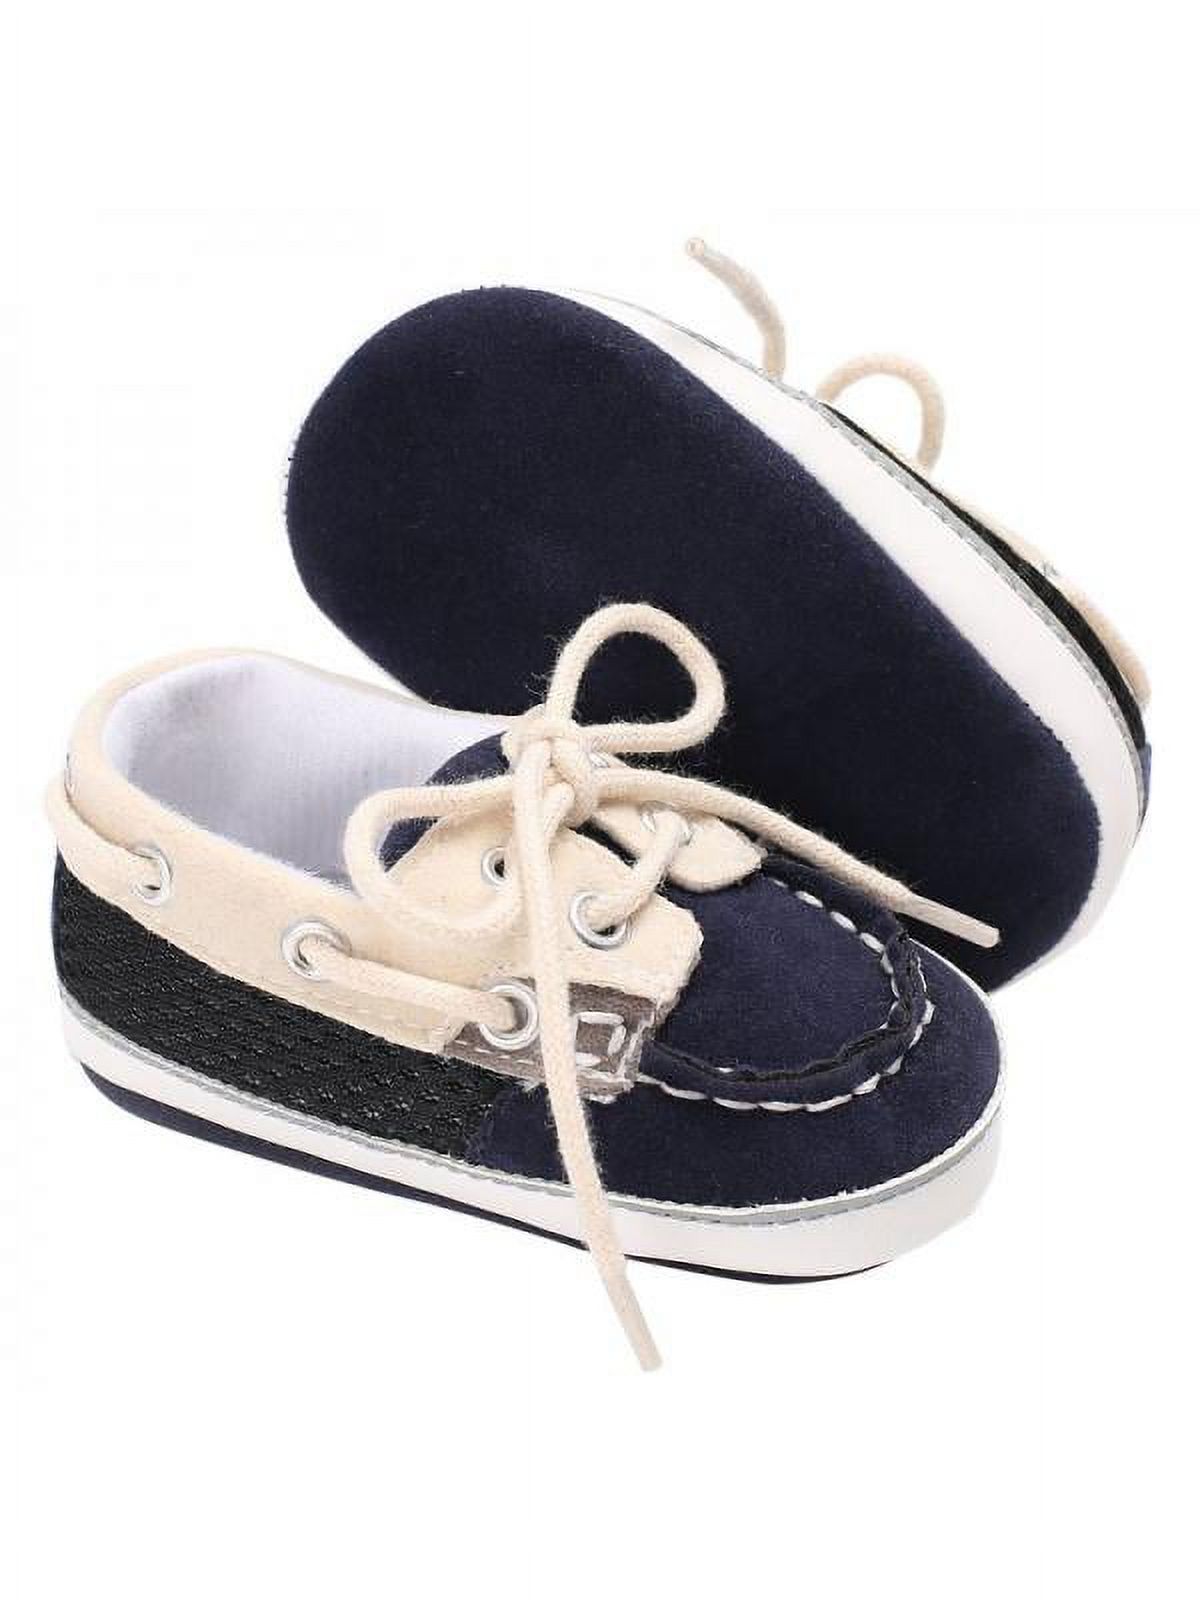 Baby Boy Casual Shoes Toddler Infant Sneaker Soft Sole Crib Shoes - image 4 of 11